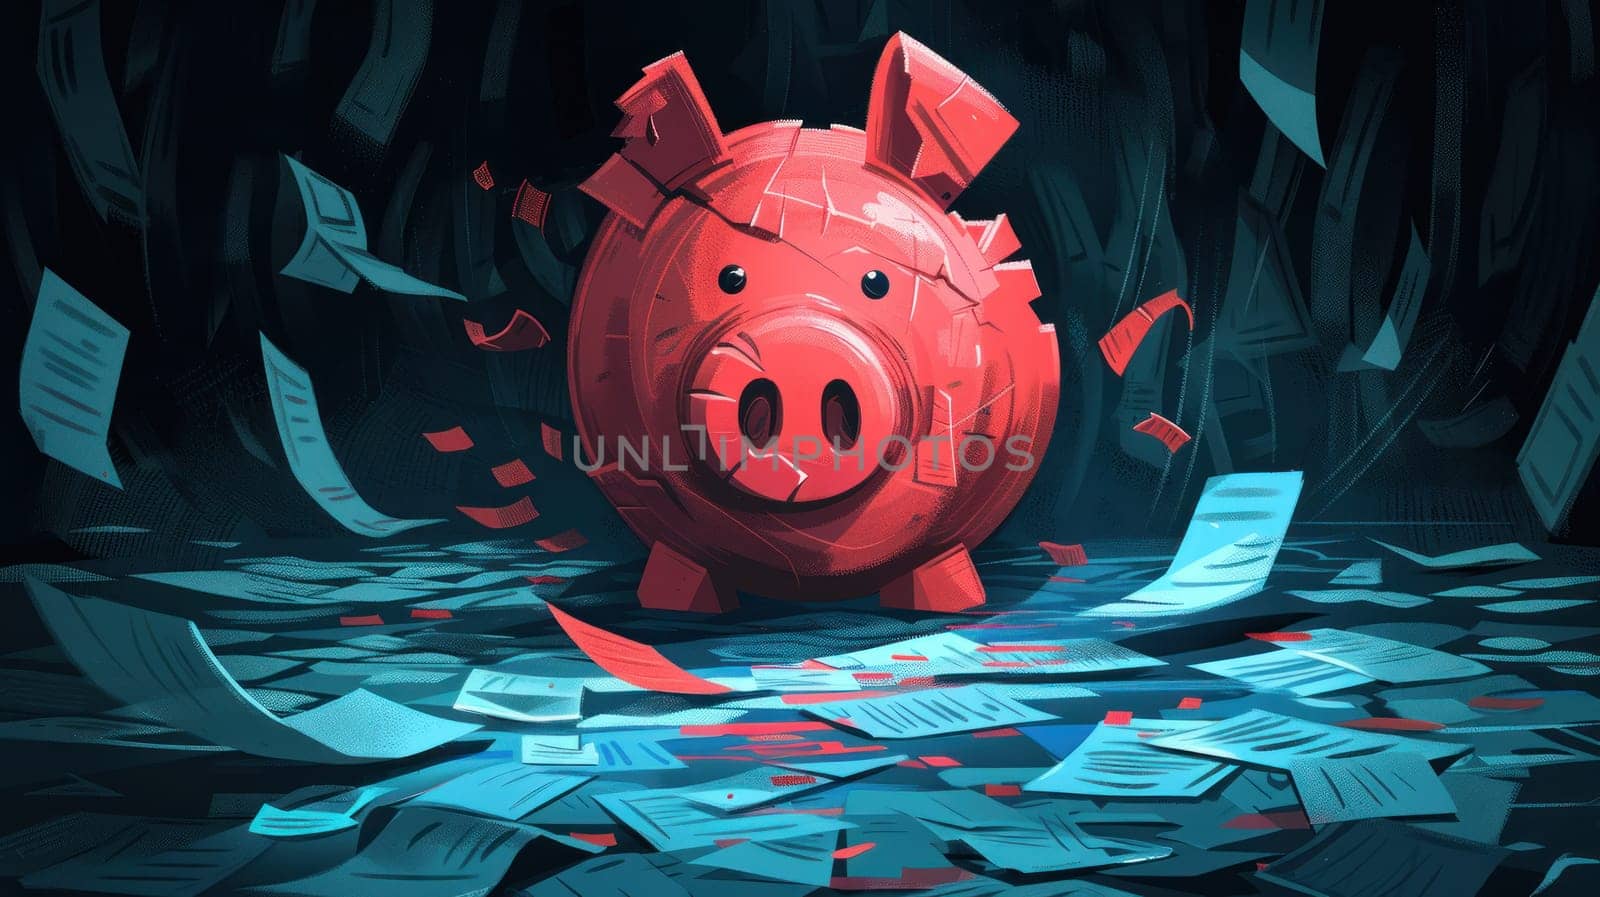 An abstract illustration of a broken piggy bank surrounded by overdue bills and debt collection letters.